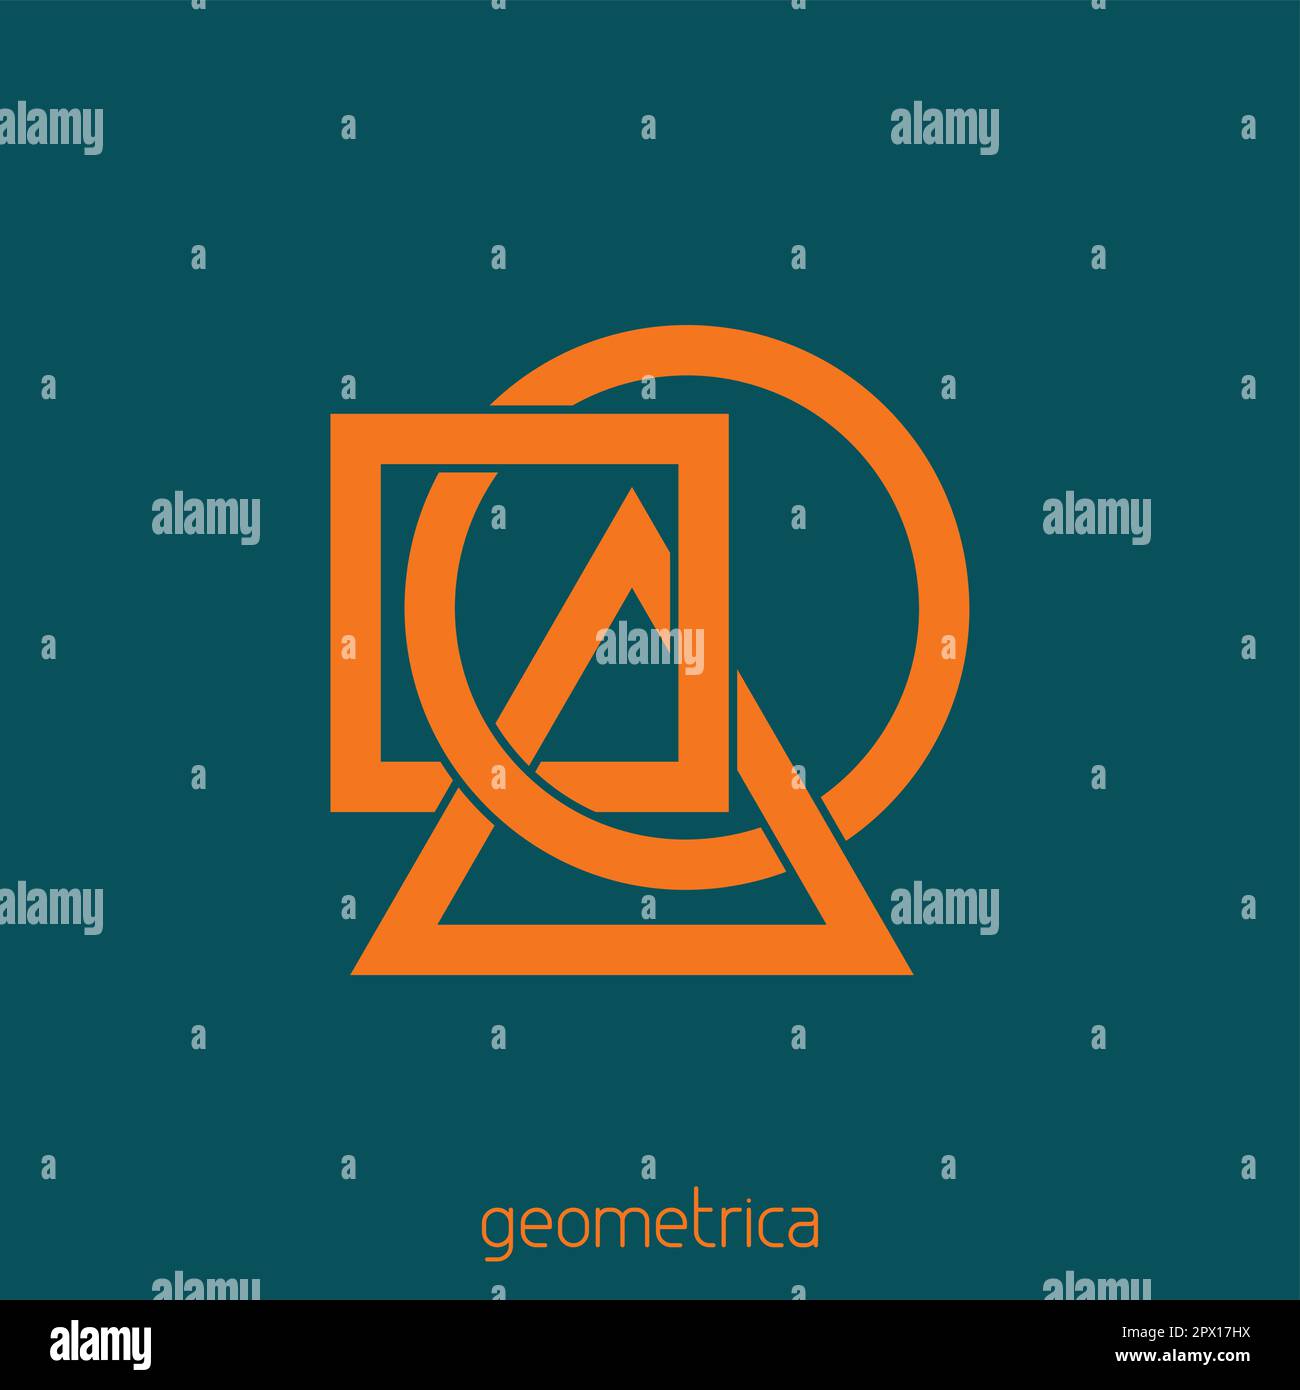 Template of simple geometrical logo with orange triangle, square and circle on a sherpa blue background. Vector Stock Vector